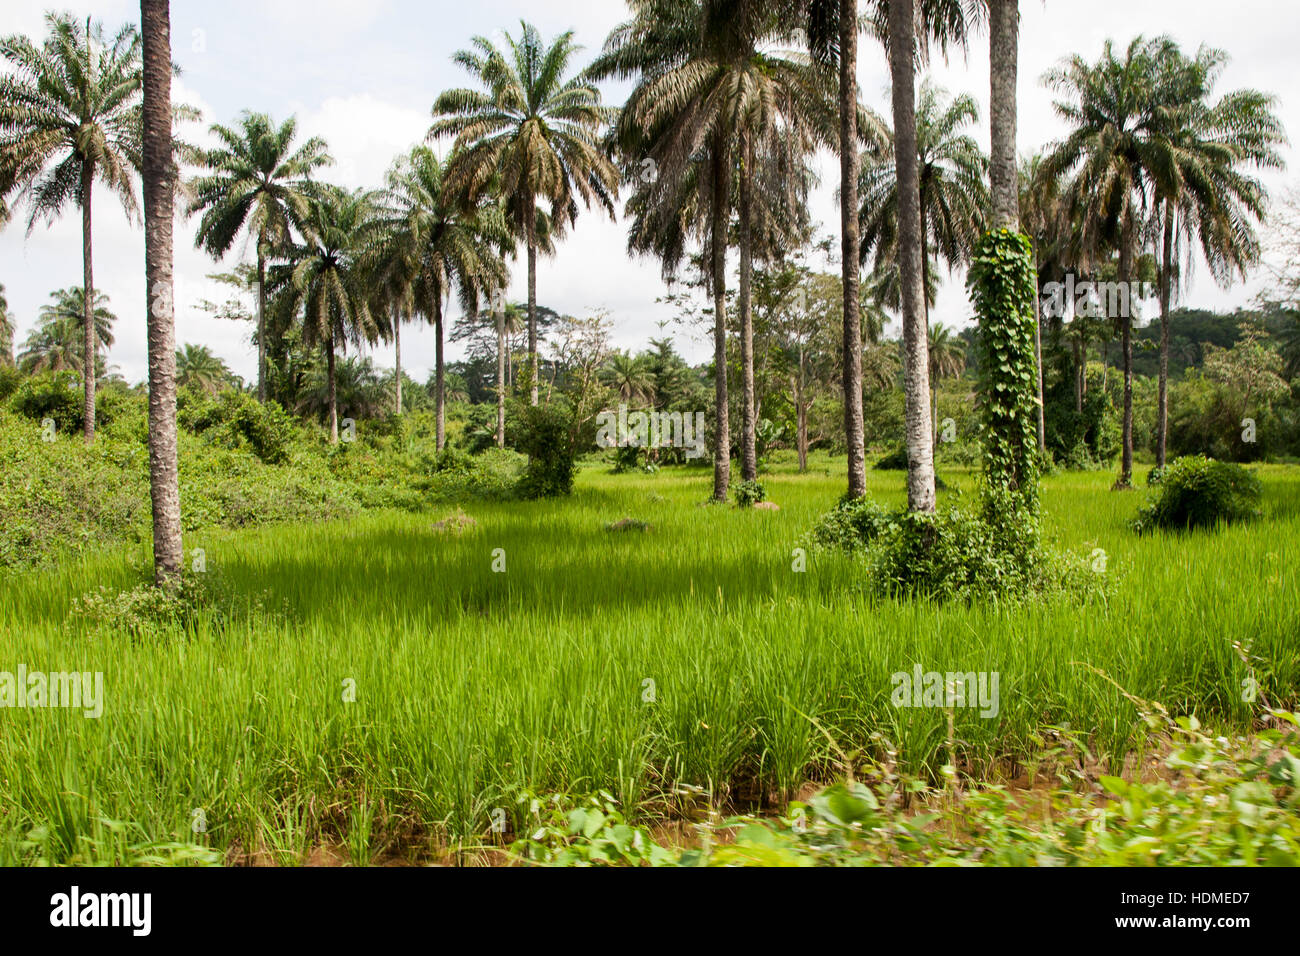 Intensive land use means in Sierra Leone: oil palms stand in rice fields Stock Photo